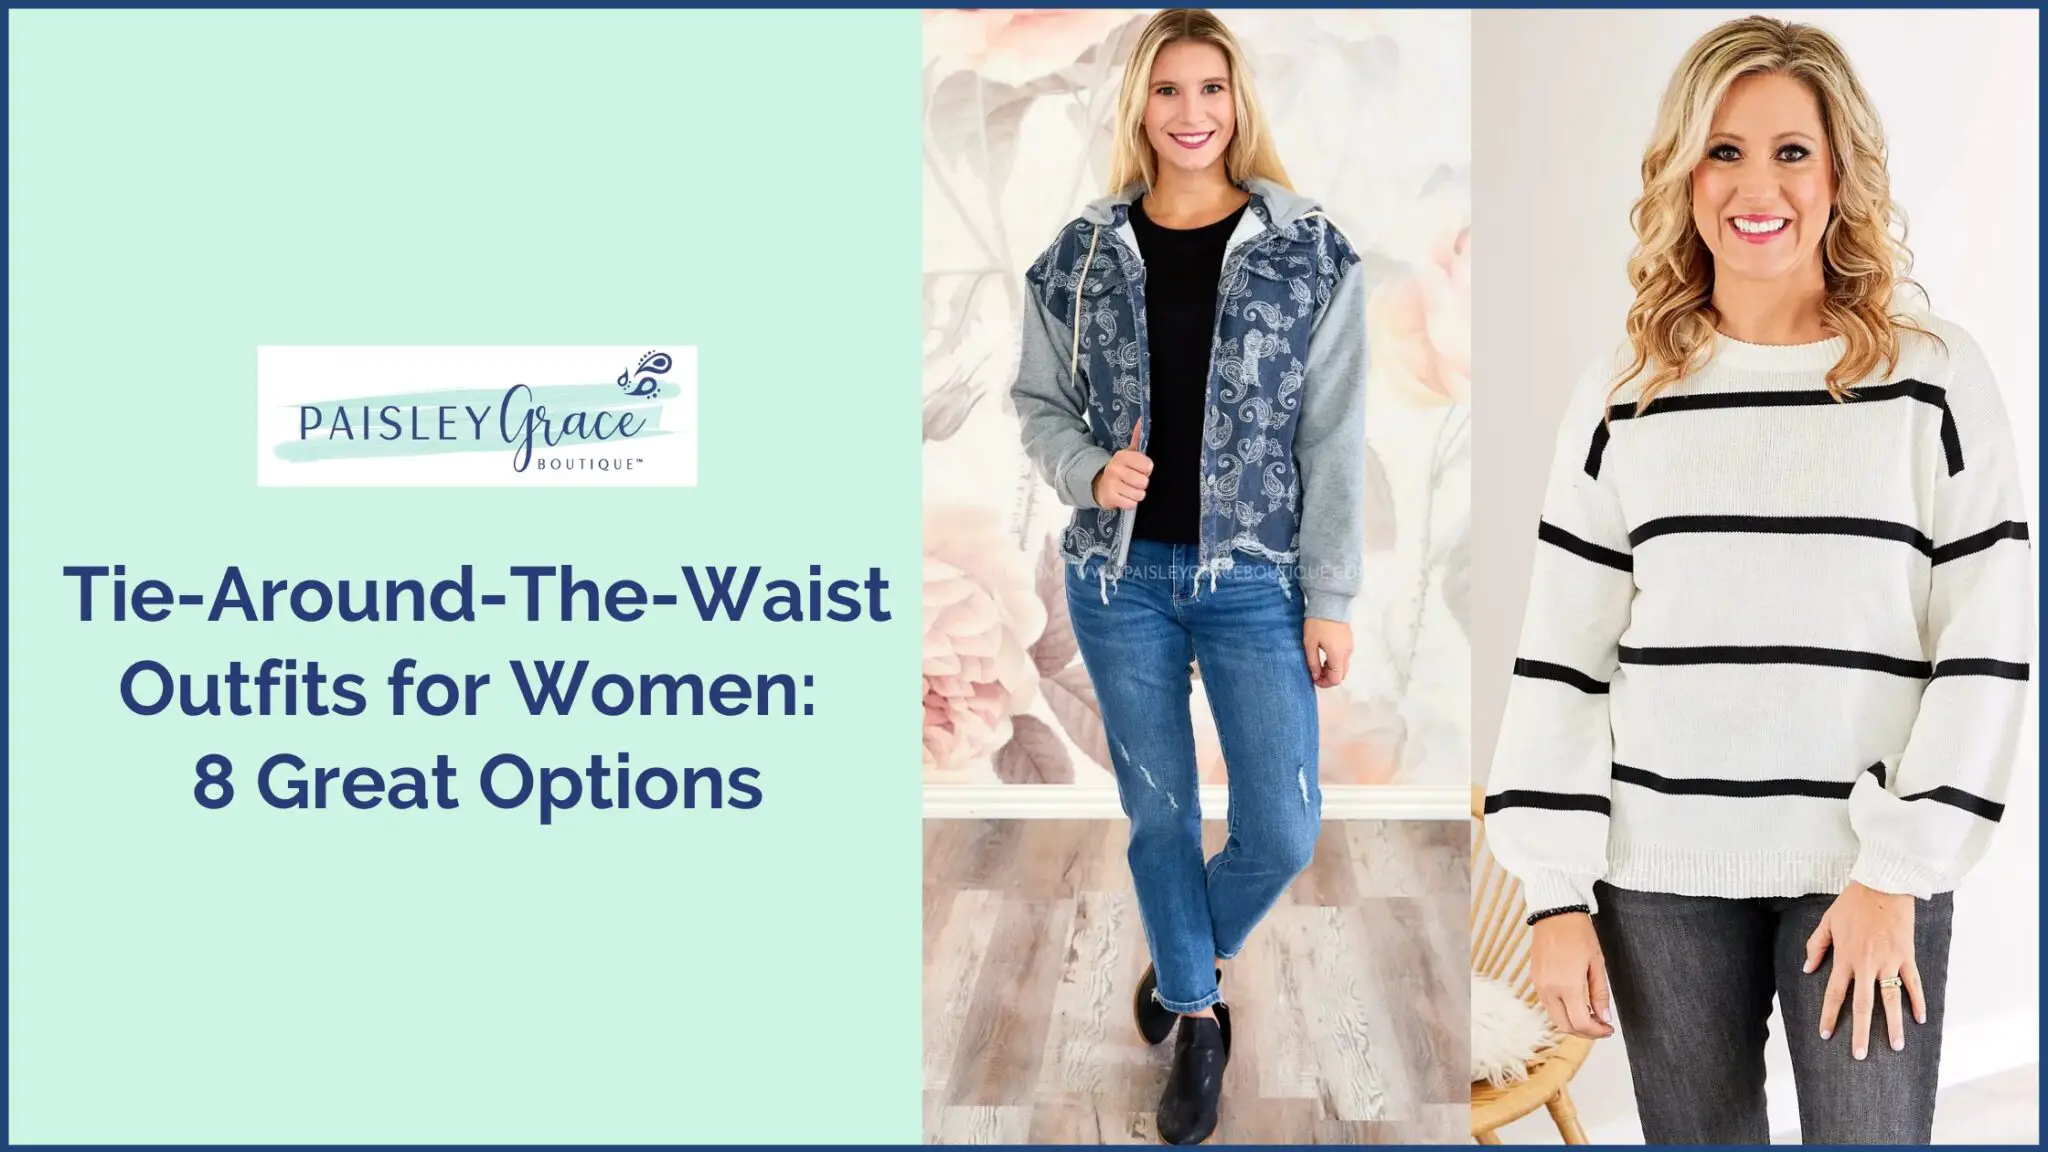 Tie-Around-The-Waist Outfits for Women 8 Great Options (1) (1)-ee06bdda